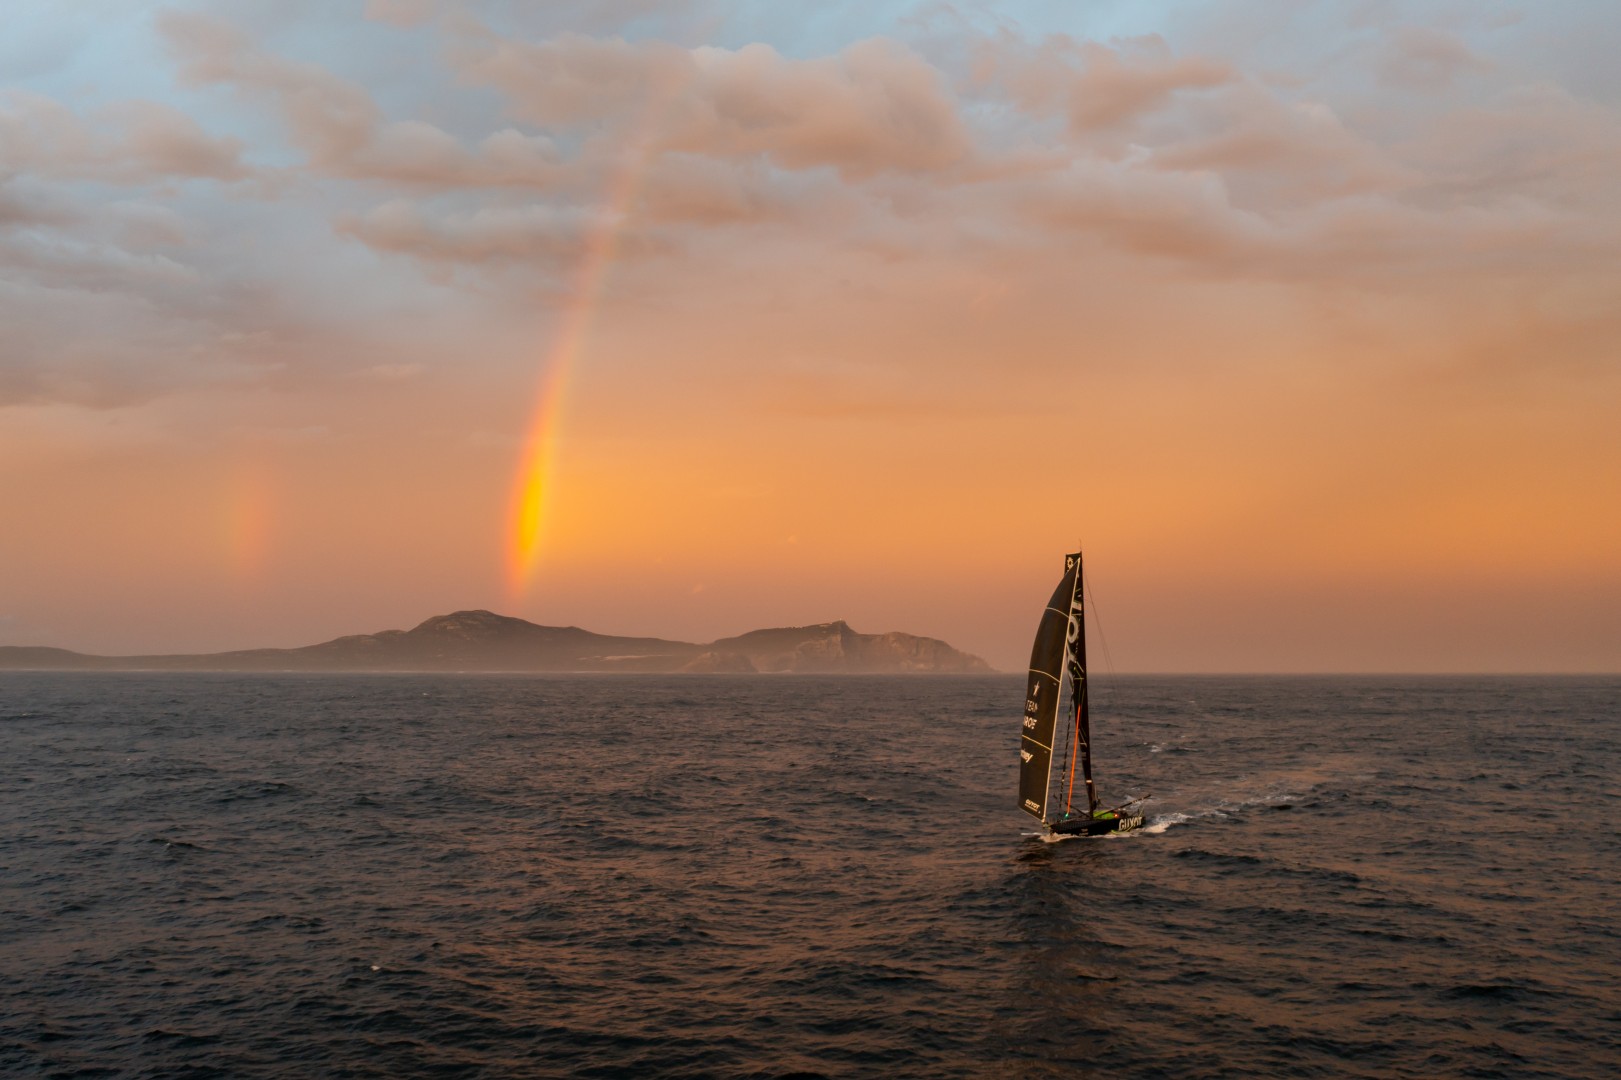 The Ocean Race 2022-23 - 4 March 2023, Leg 2, Day 6 onboard Guyot environnement - Team Europe. View of the african coast as they get closer to Cape Town